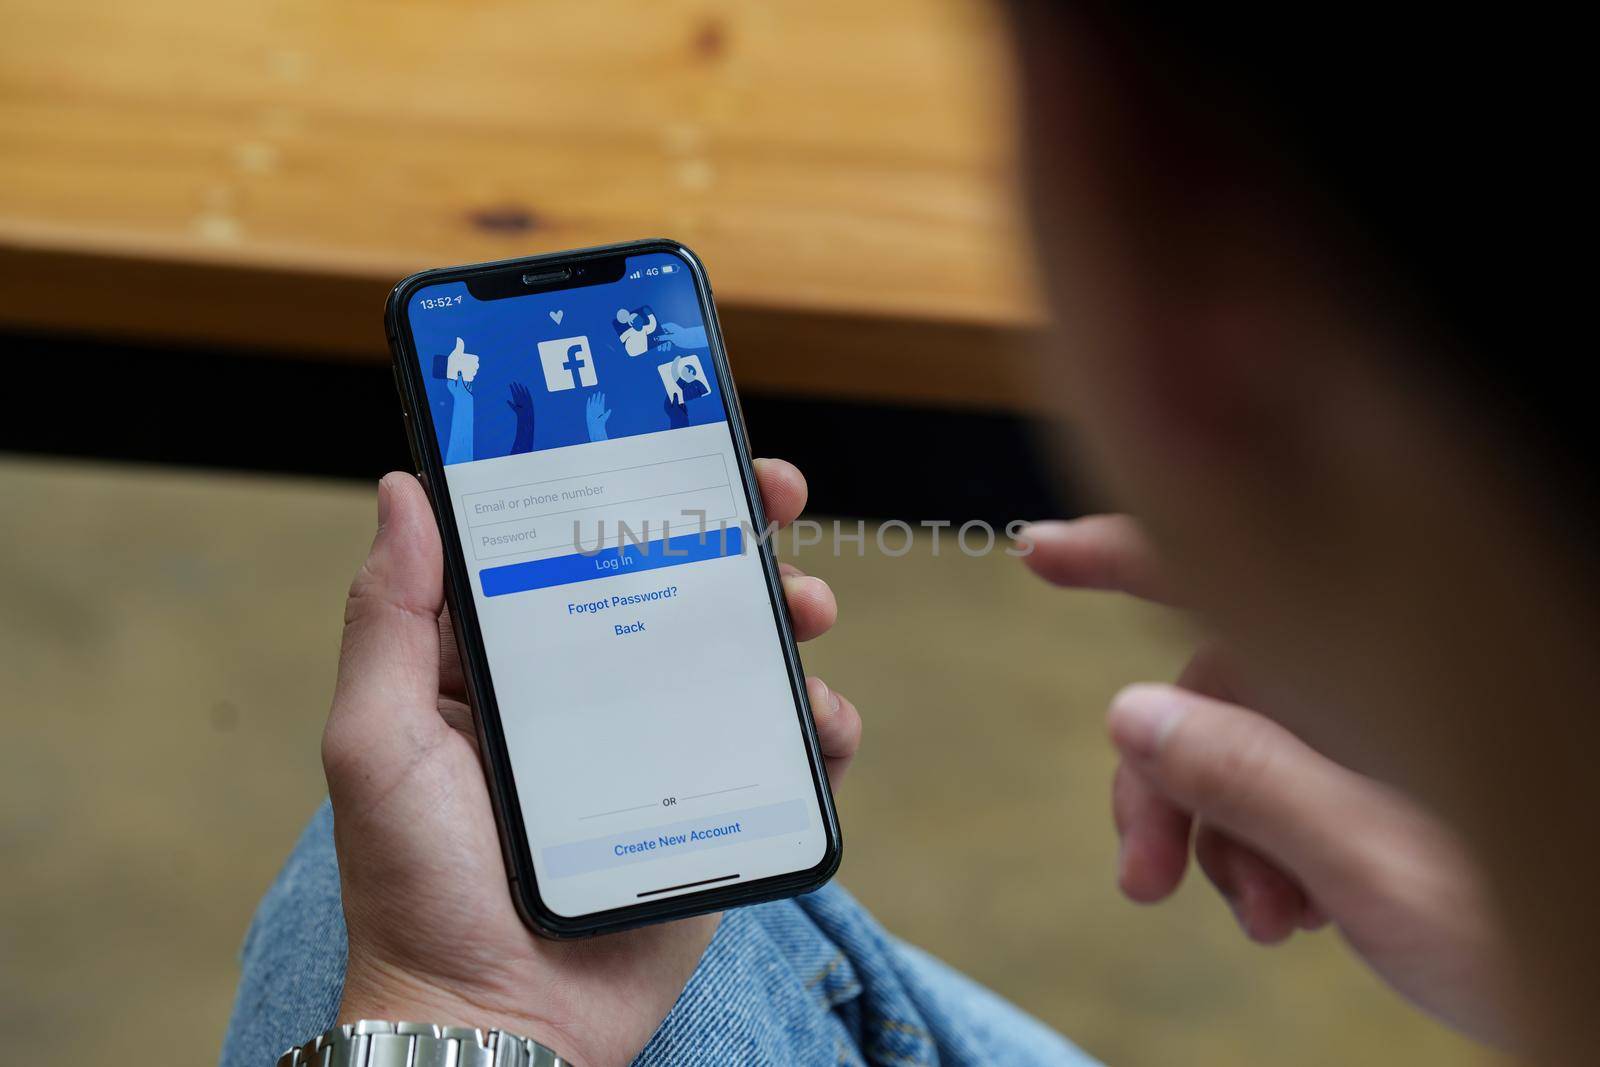 CHIANG MAI, THAILAND - AUG 25, 2022 : A man holds Apple iPhone with facebook application on the screen.facebook is a photo-sharing app for smartphones. facebook is a social network.